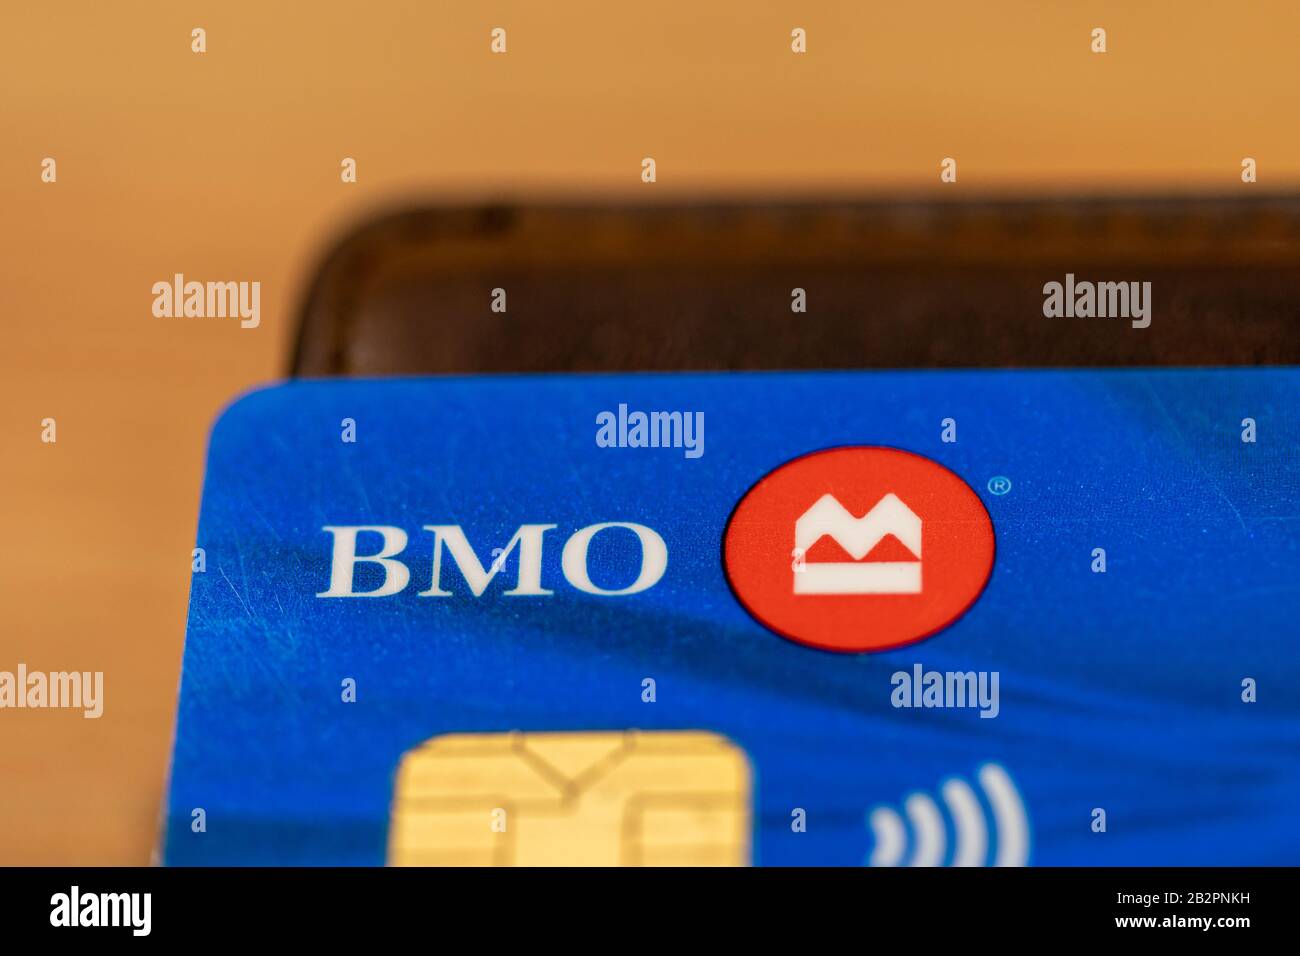 BMO (Bank of Montreal) logo on a blue debit card, atop of a wallet on a desk. Stock Photo